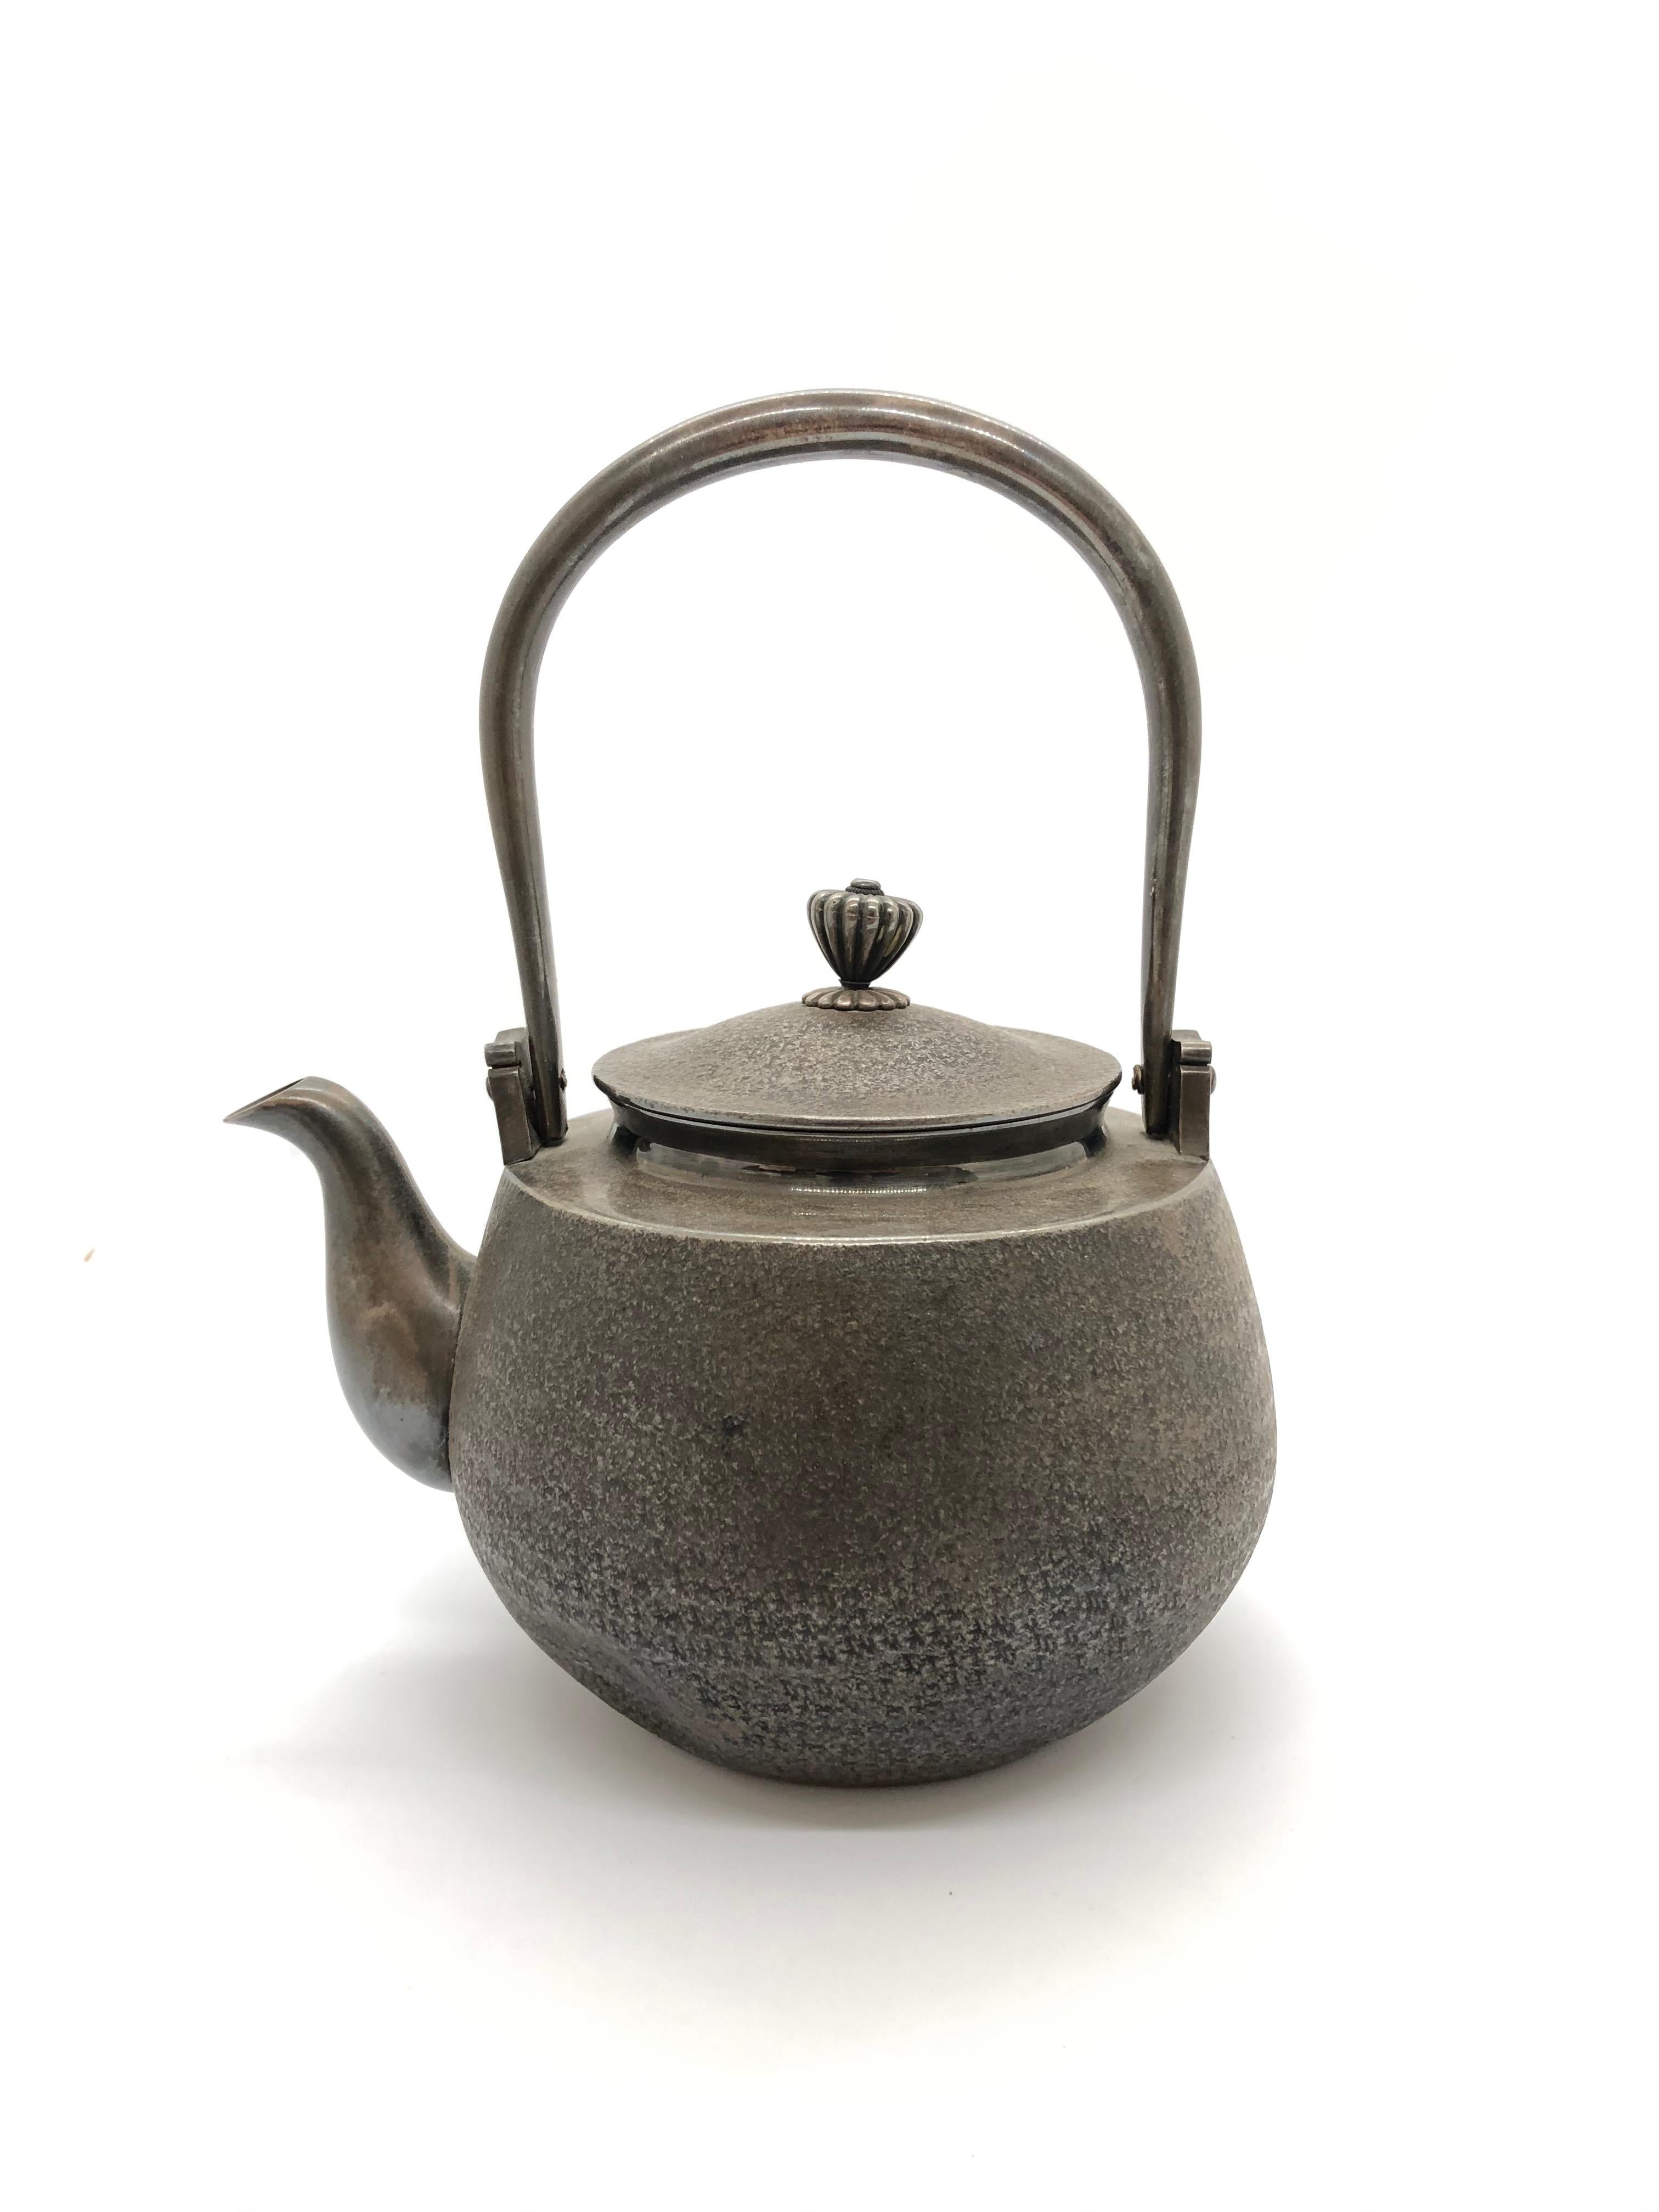 A silver teapot with a great design, signature and mark inside.